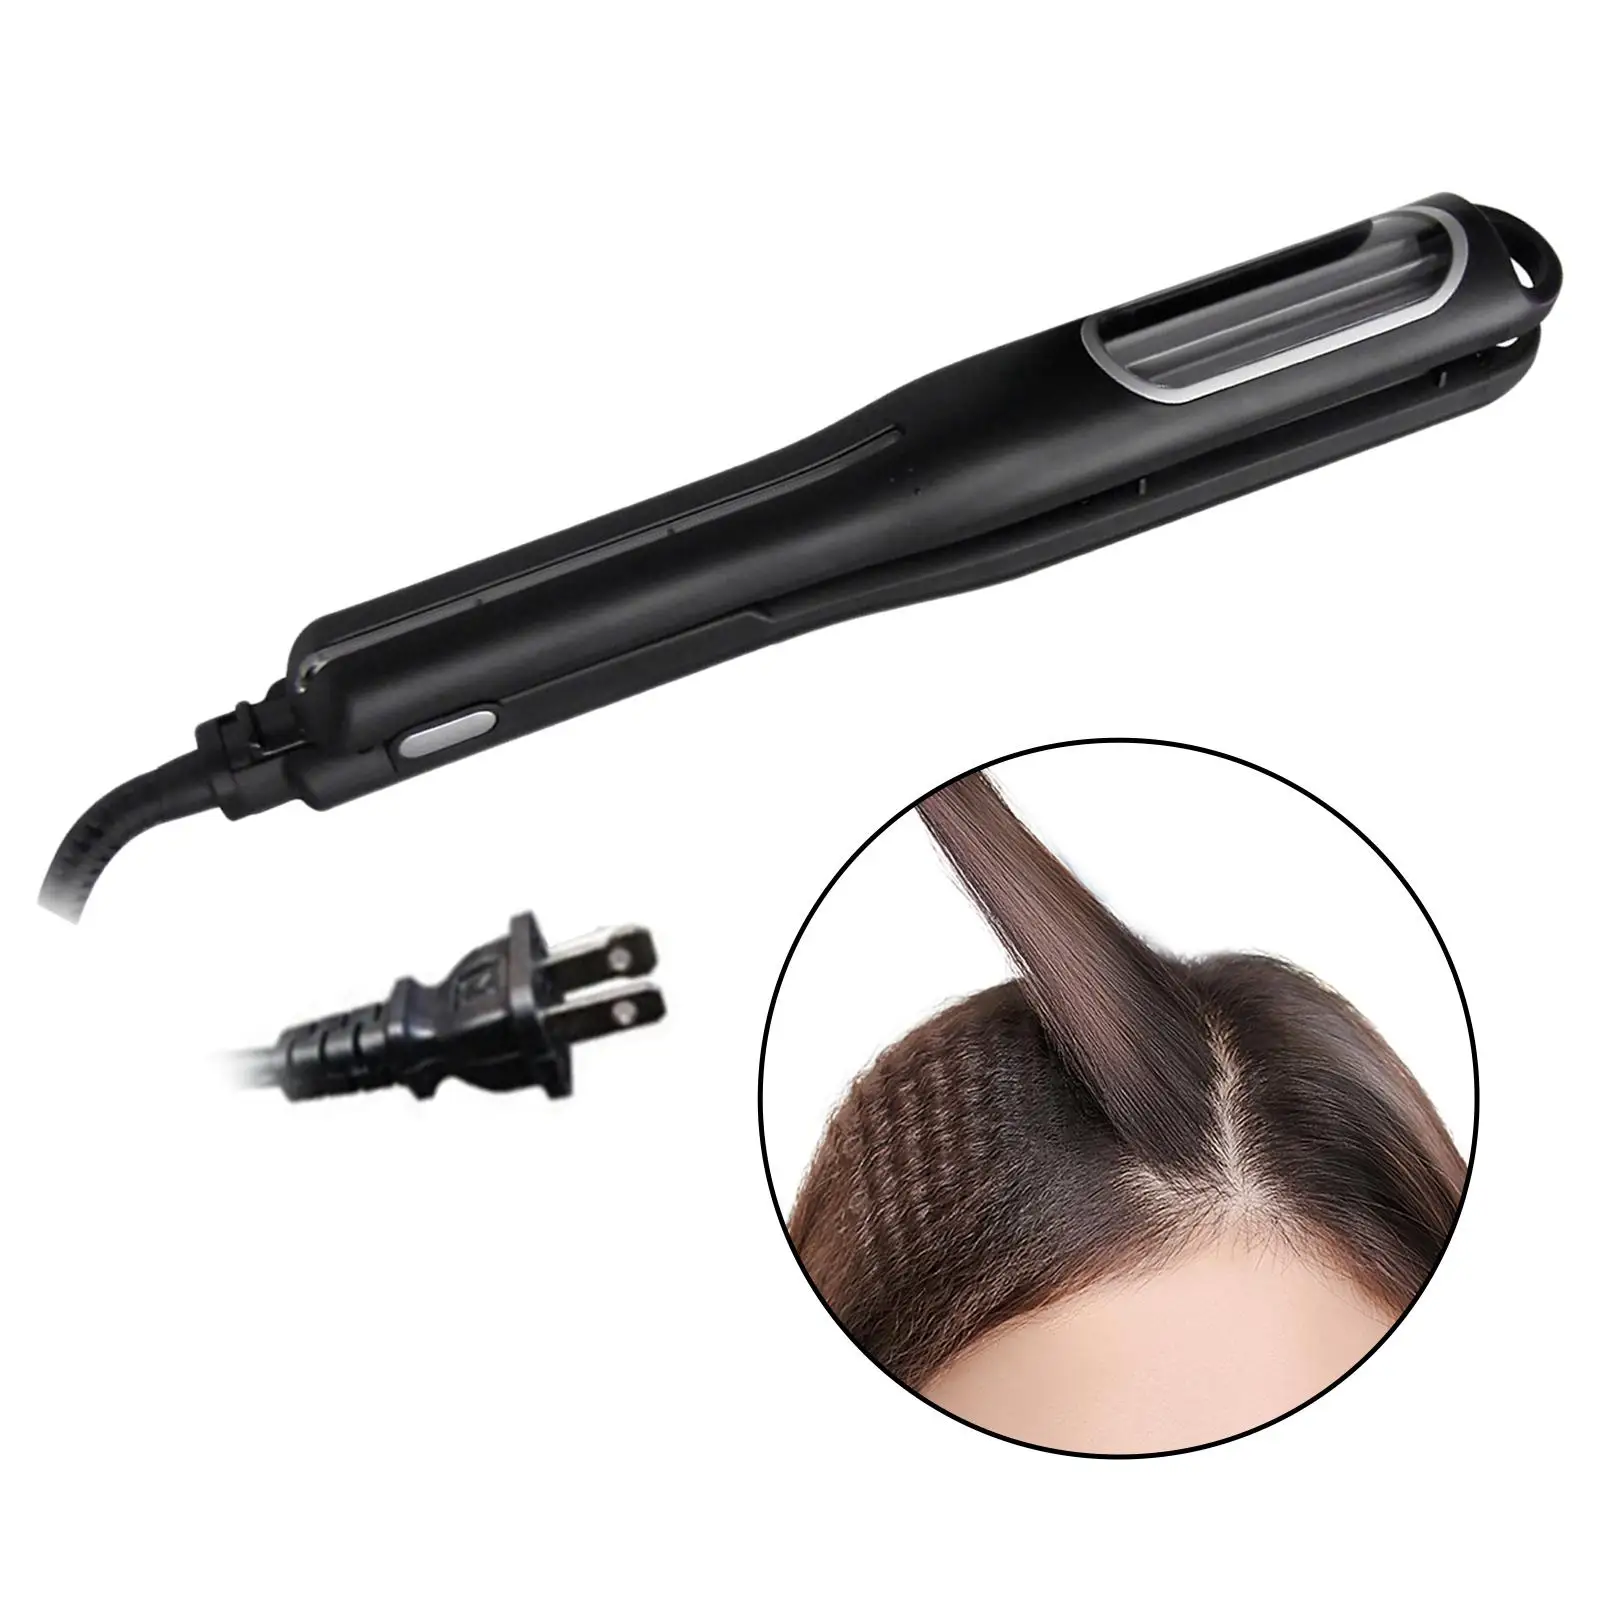 Wavy Professional Rotating Curling Iron, Auto Hair Curler with 2 Adjustable Temps 250°F to 450° Types, Anti-Scald & Auto-off